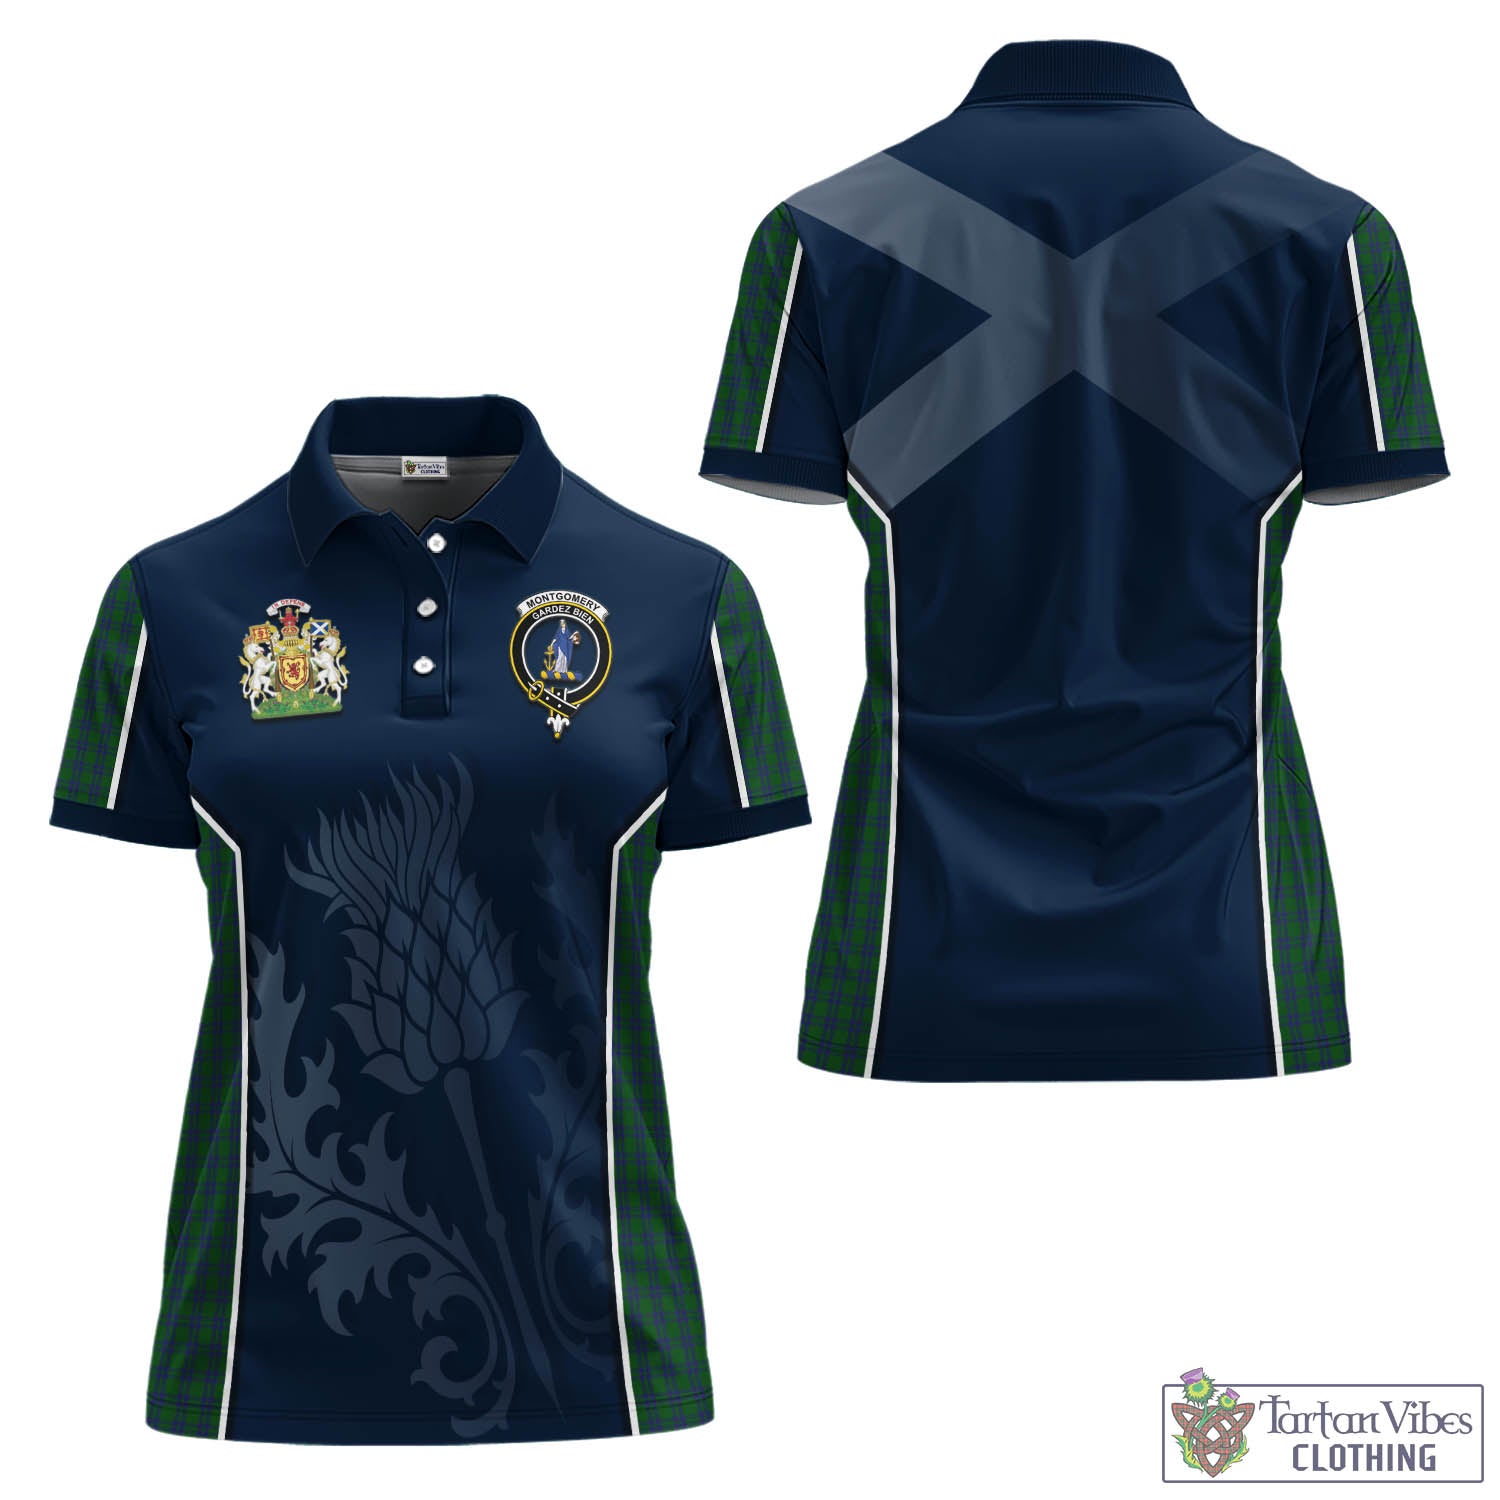 Tartan Vibes Clothing Montgomery Tartan Women's Polo Shirt with Family Crest and Scottish Thistle Vibes Sport Style